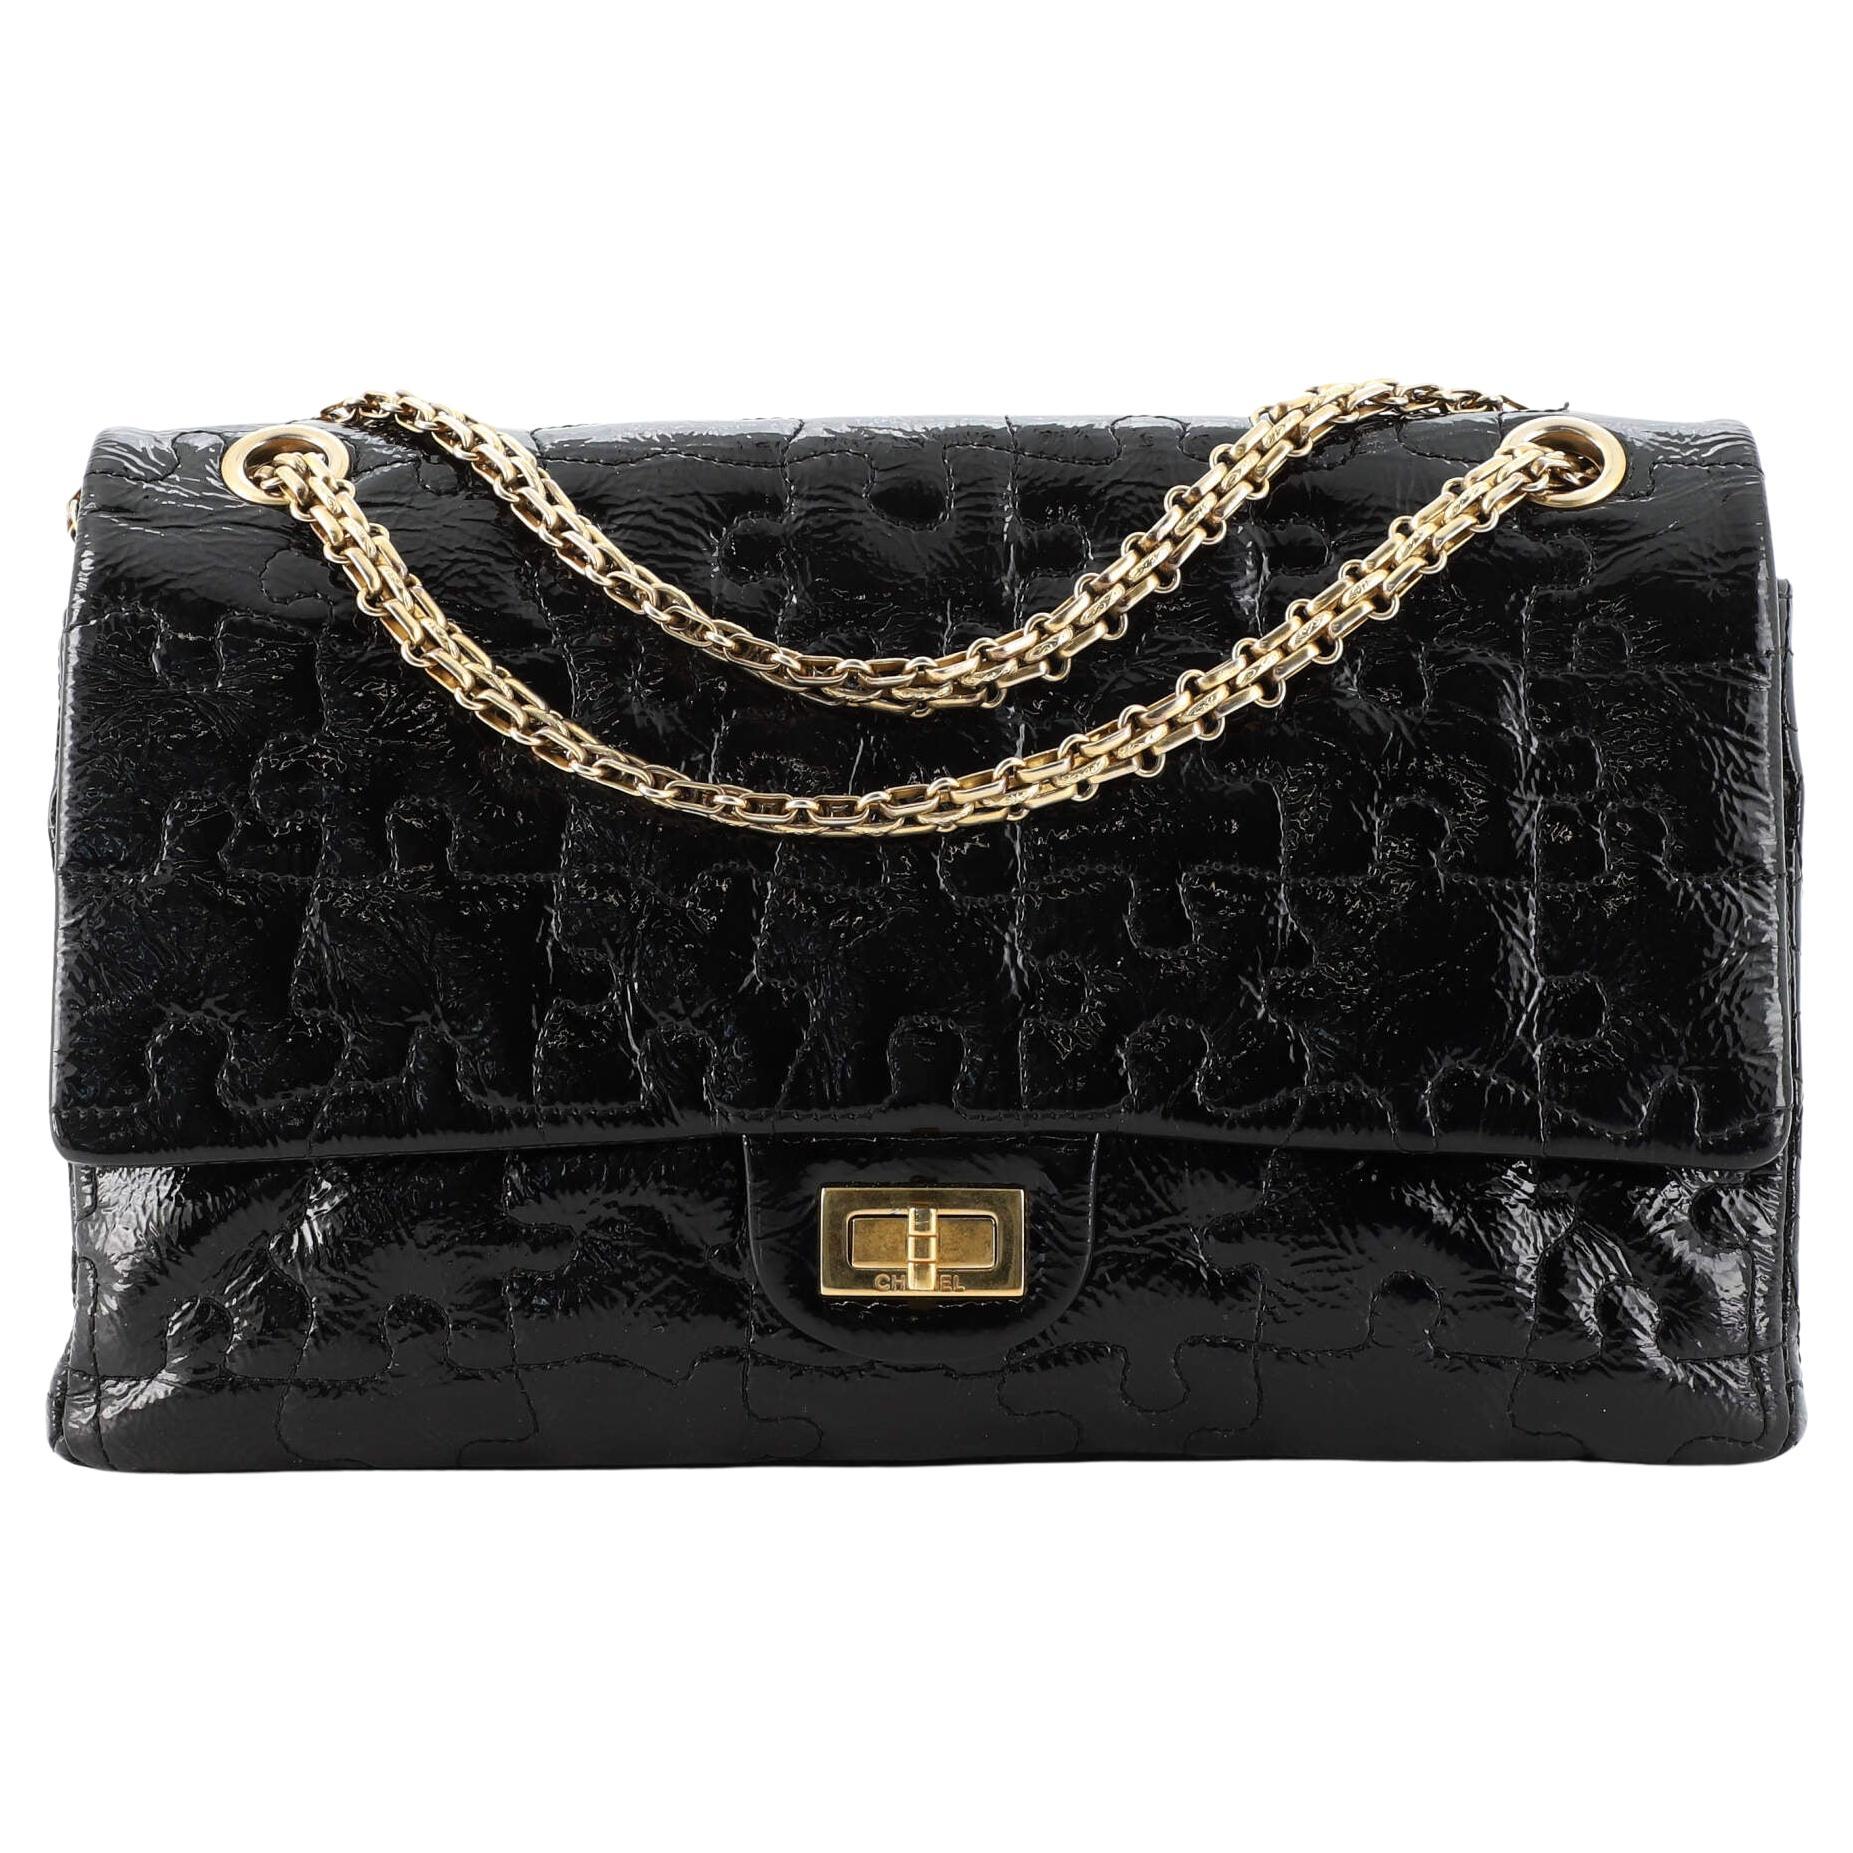 Chanel Puzzle Reissue 2.55 Flap Bag Quilted Patent 226